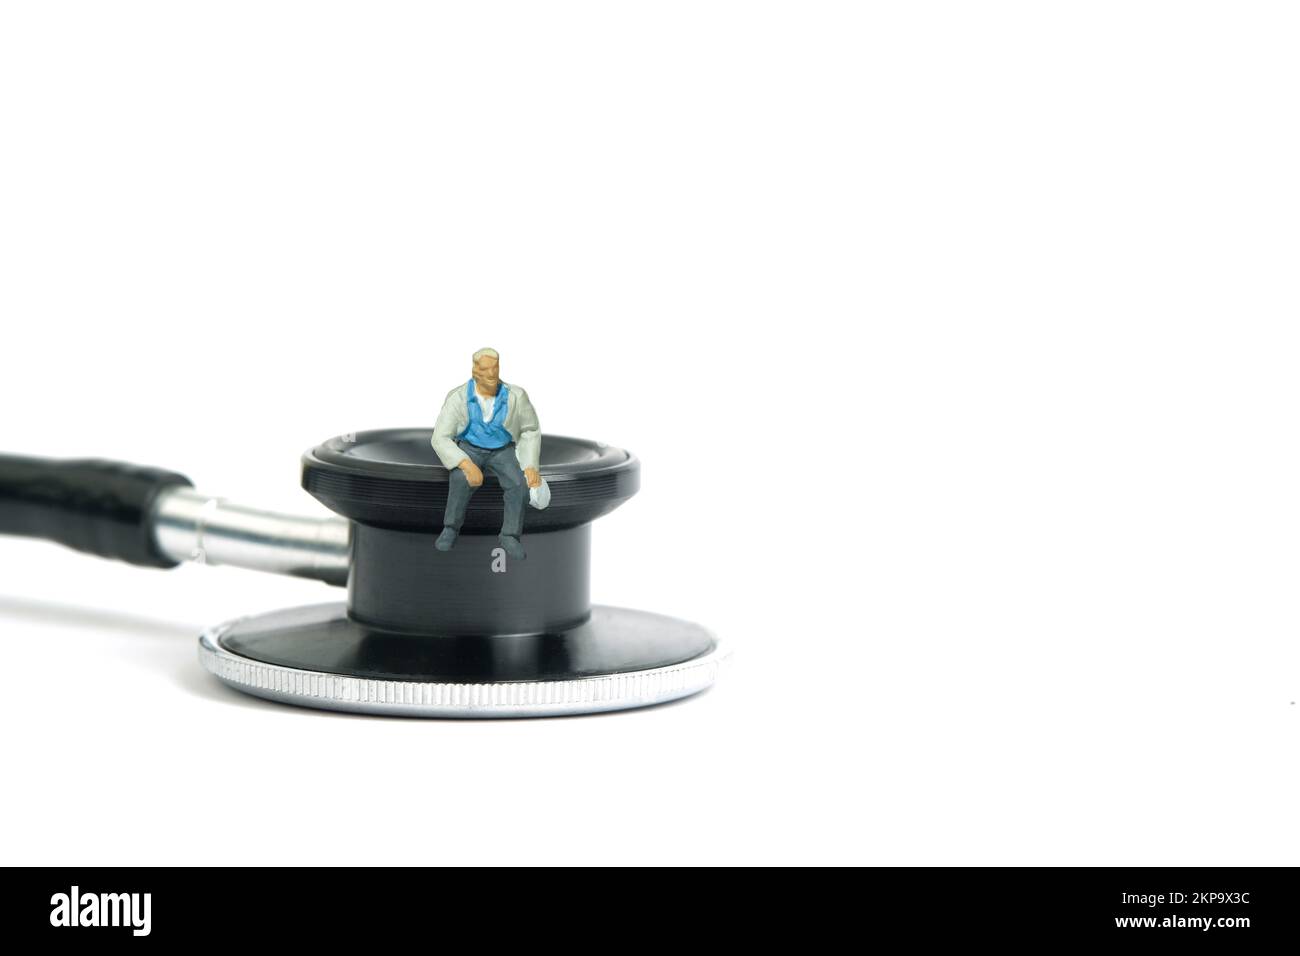 Miniature people toy figure photography. Worker health insurance concept. Men worker sitting above stethoscope. Isolated on white background. Image ph Stock Photo